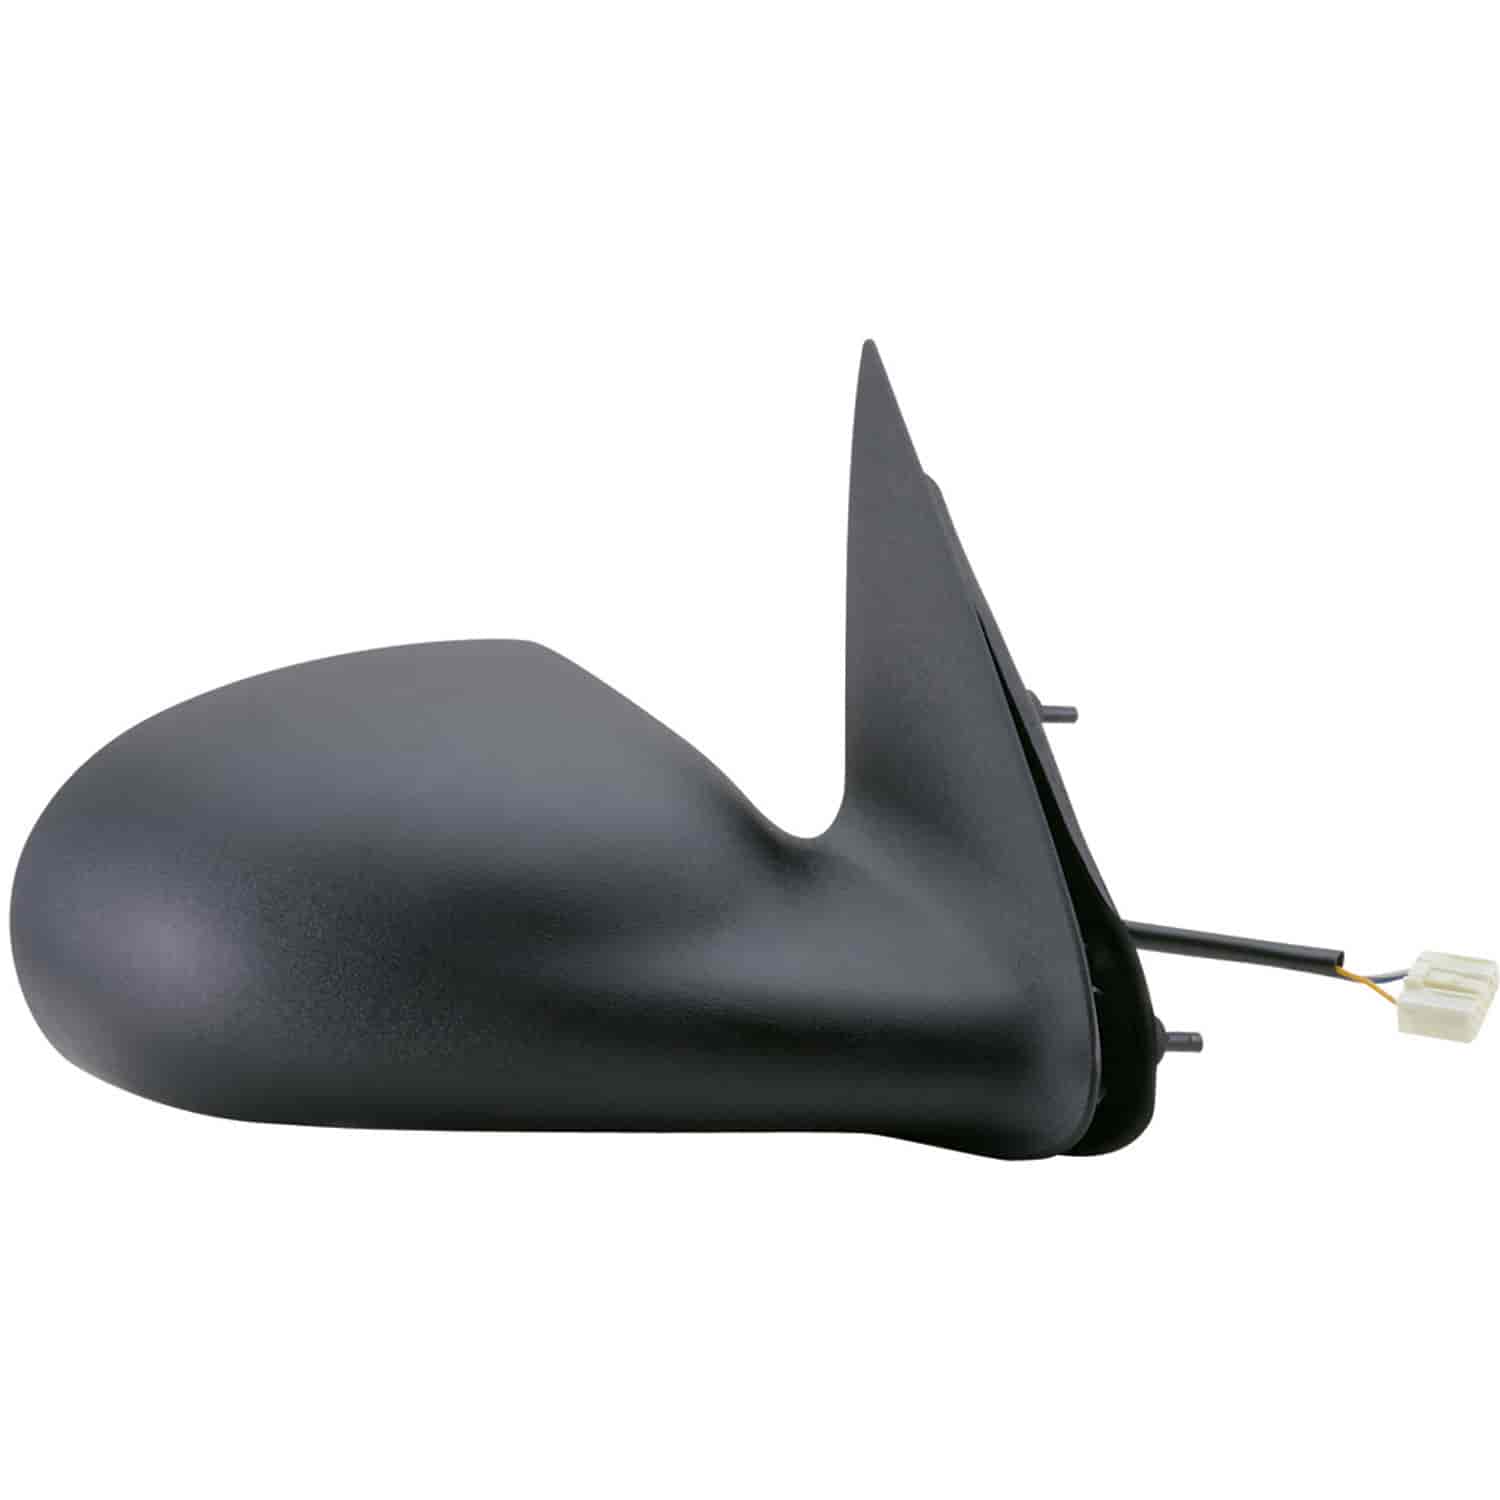 OEM Style Replacement mirror for 03 Chrysler PT Cruiser passenger side mirror tested to fit and func